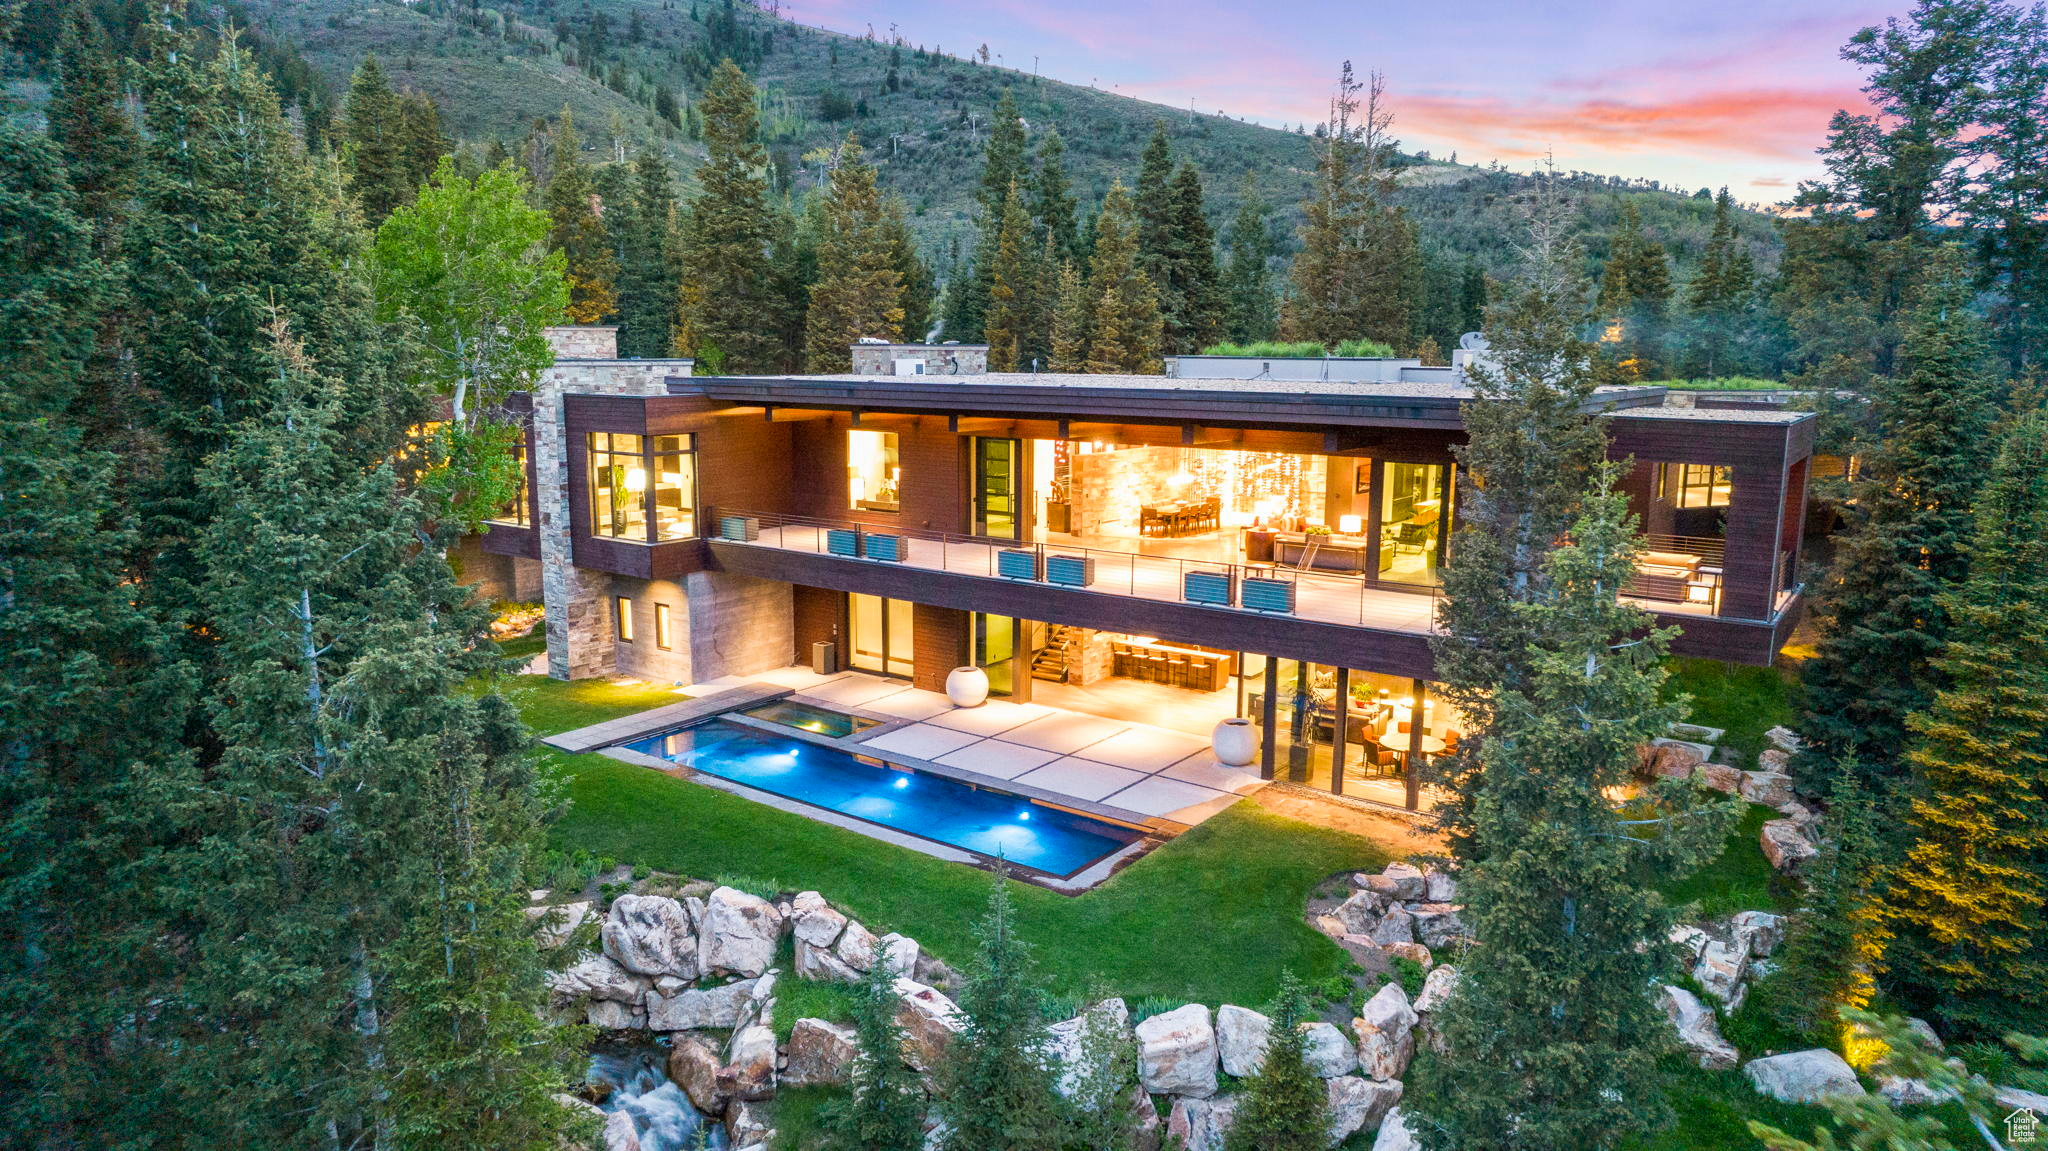 2470 W WHITE PINE, Park City, Utah 84060, 4 Bedrooms Bedrooms, 28 Rooms Rooms,1 BathroomBathrooms,Residential,For sale,WHITE PINE,1990745